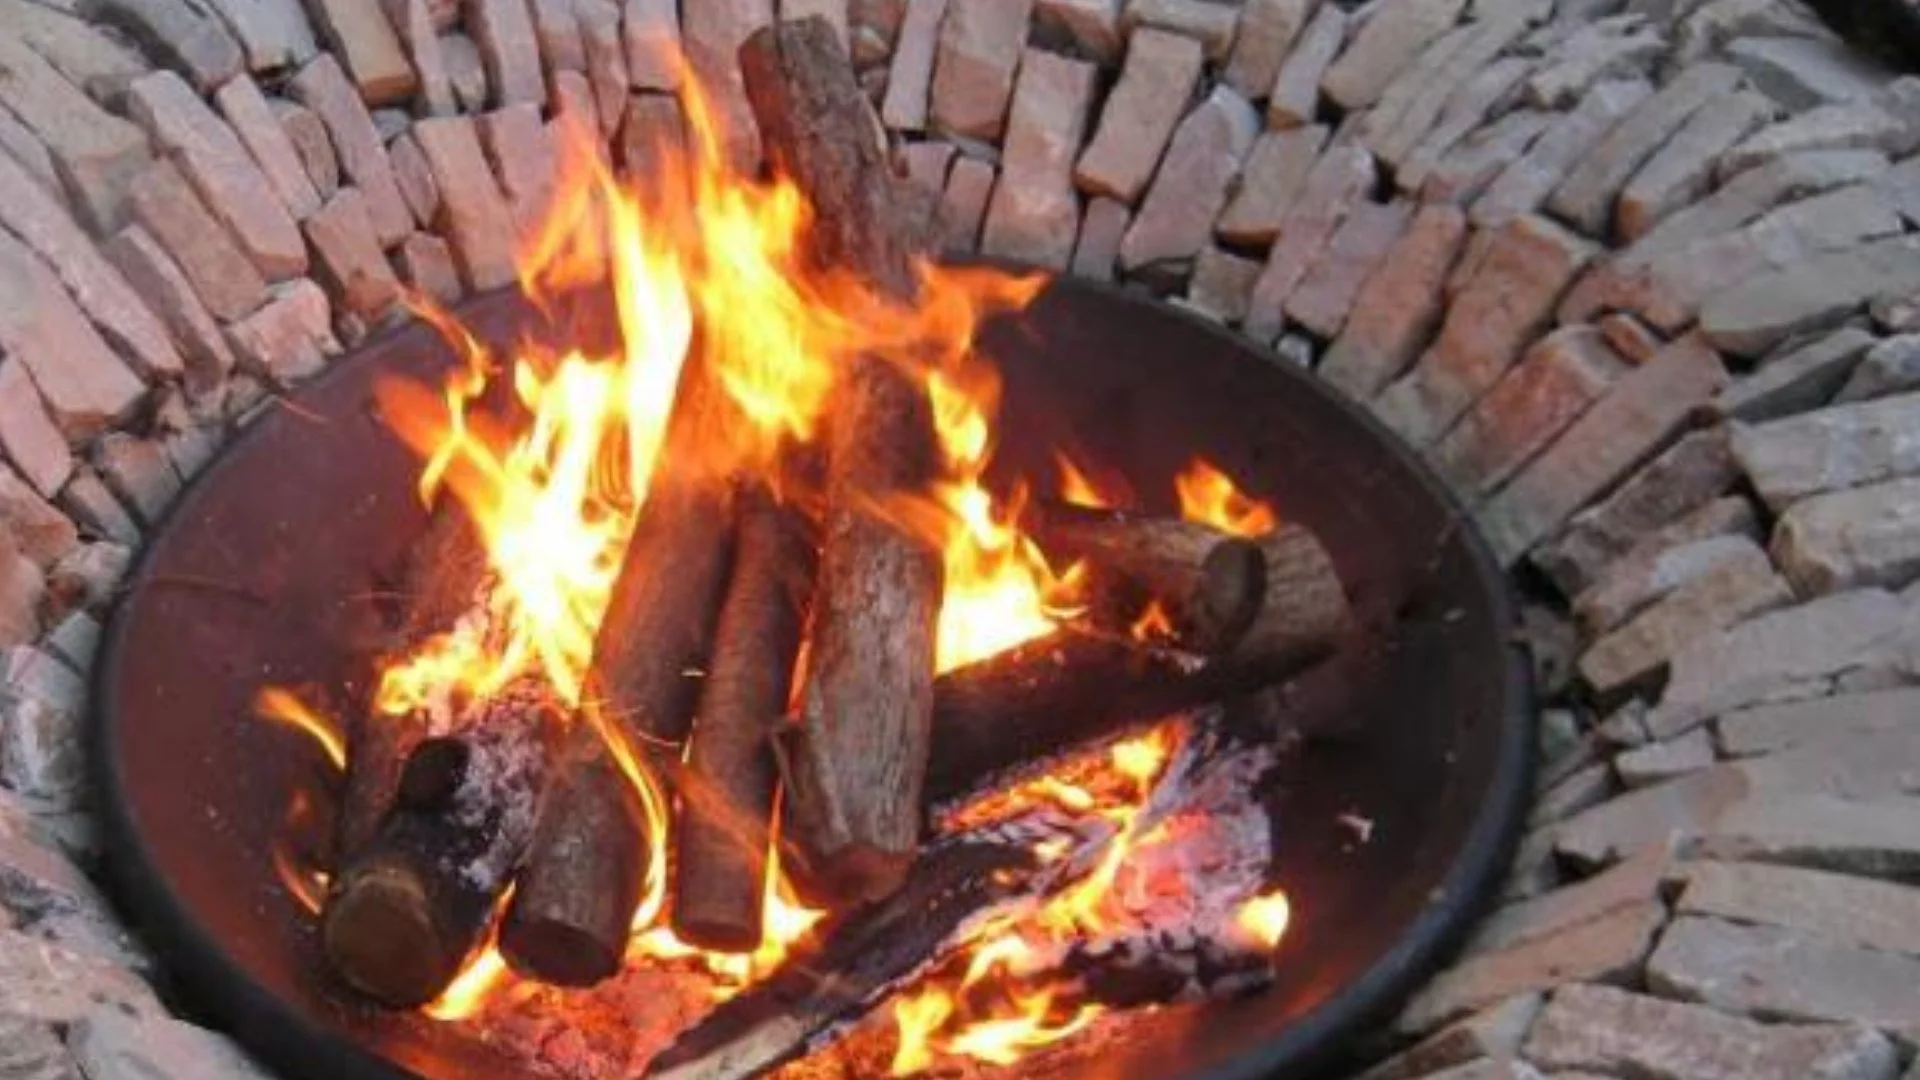 Here Are a Few Things to Consider When Designing a Fire Pit From Scratch